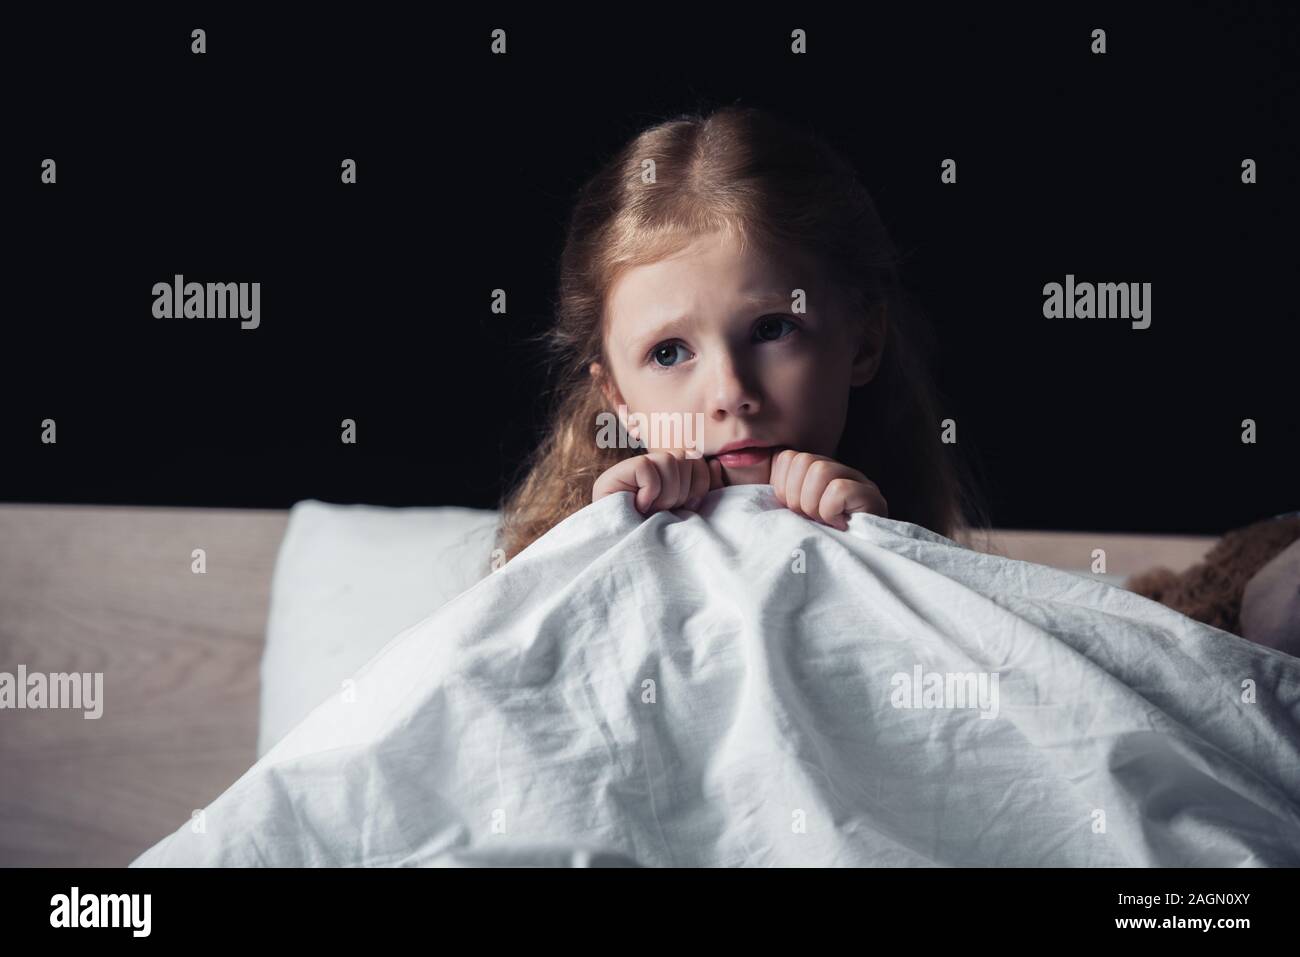 scared child looking away while sitting on bedding in dark bedroom isolated on black Stock Photo